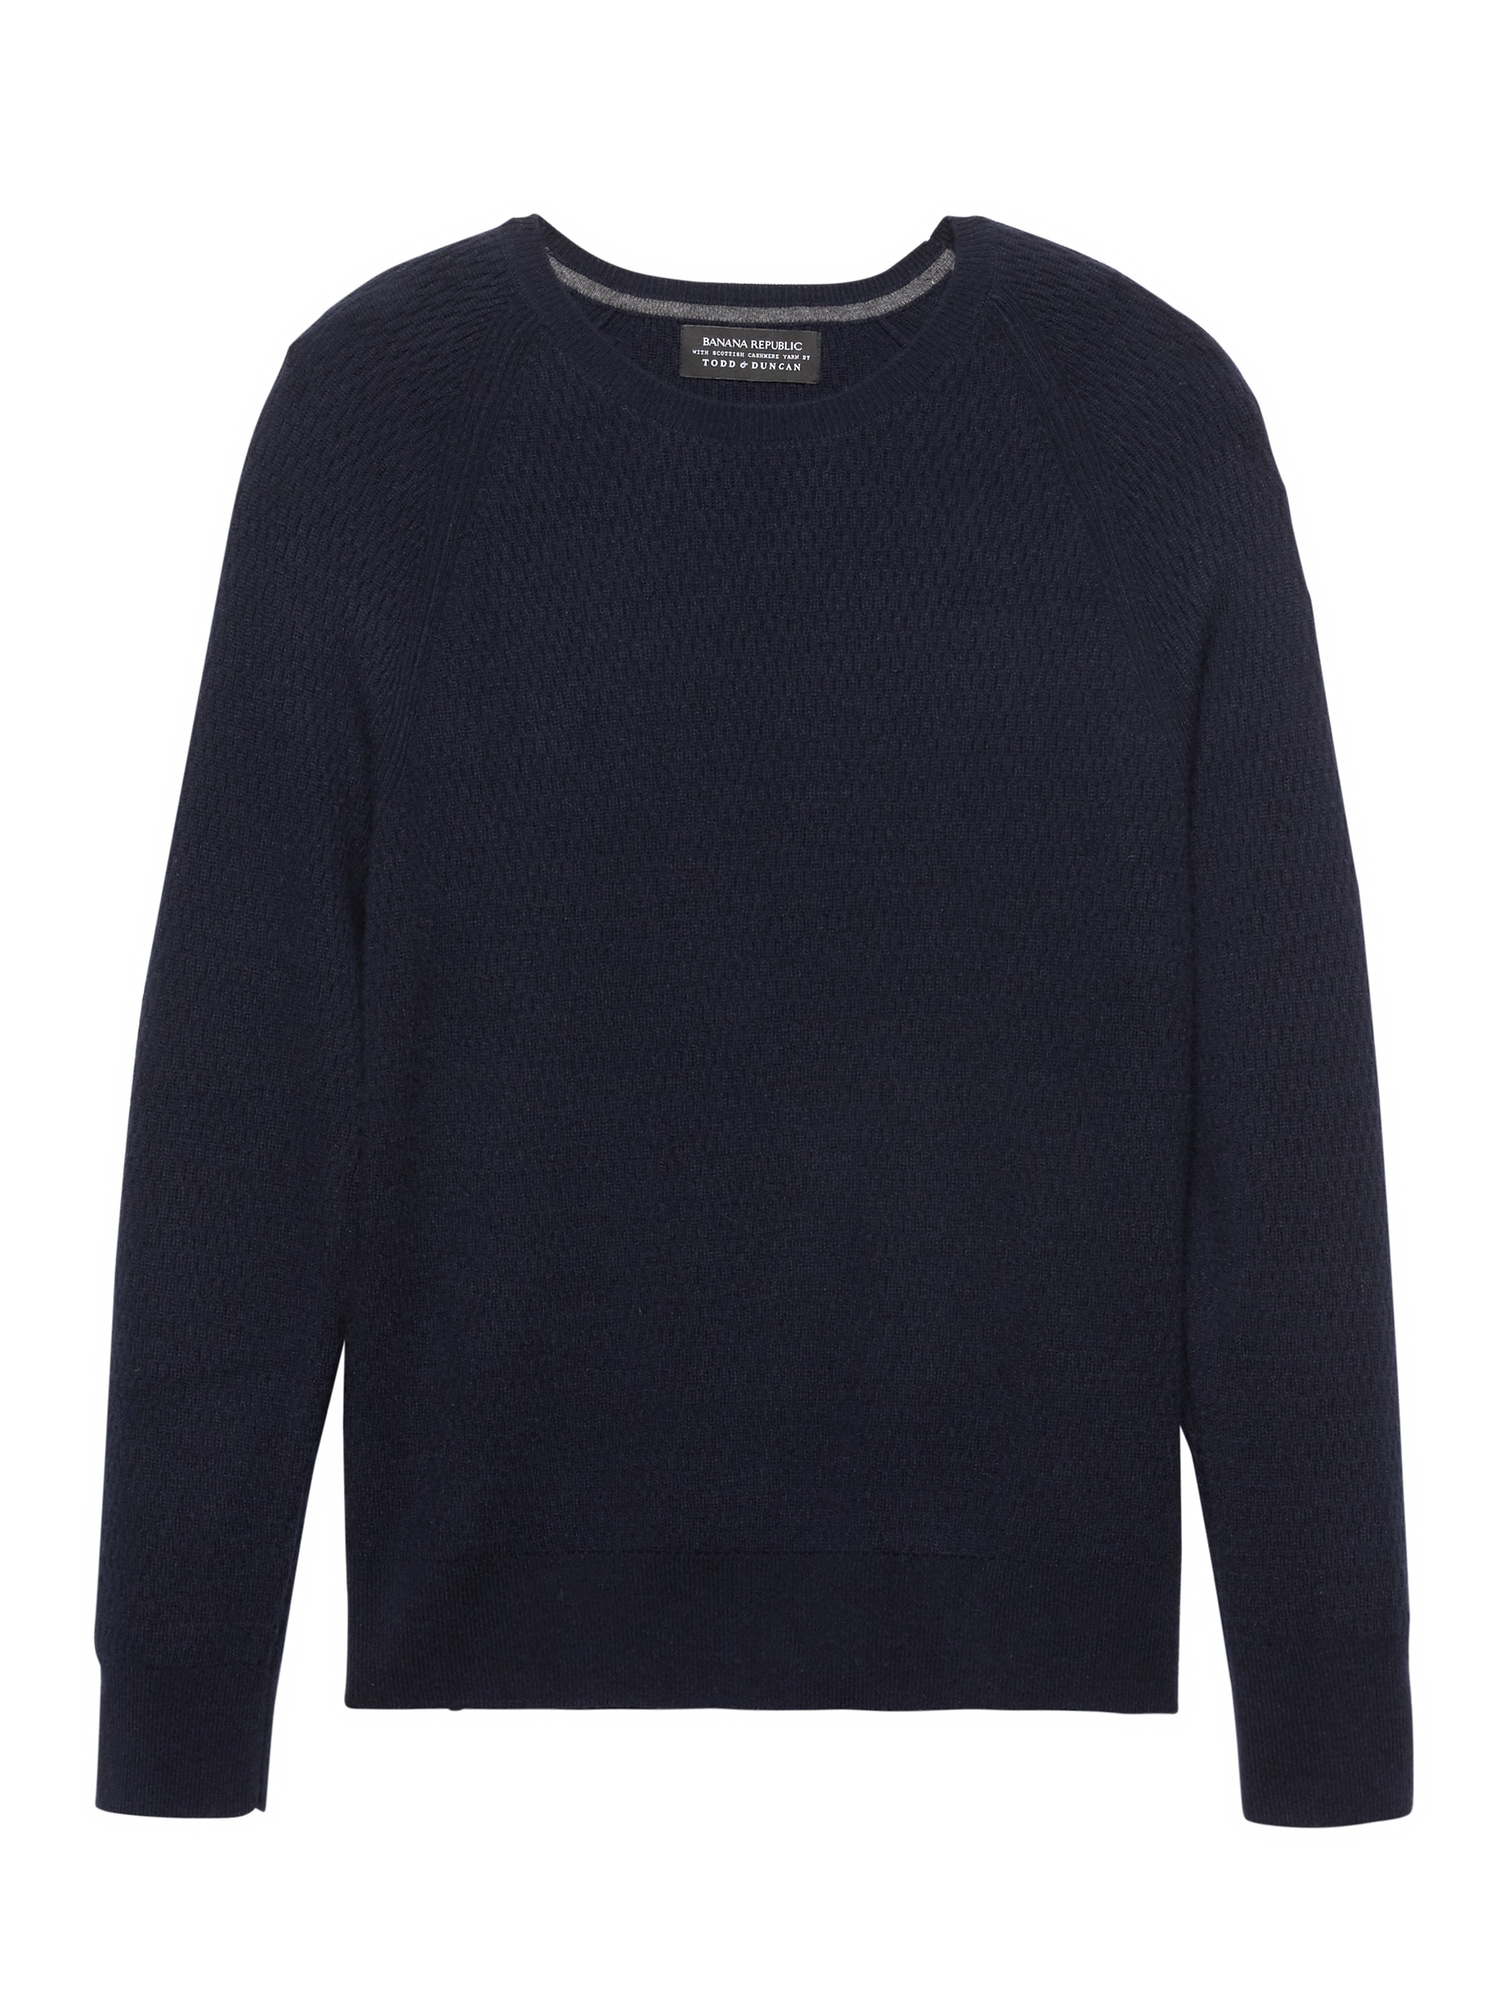 Todd & Duncan Cashmere Thermal Crew-Neck Sweater